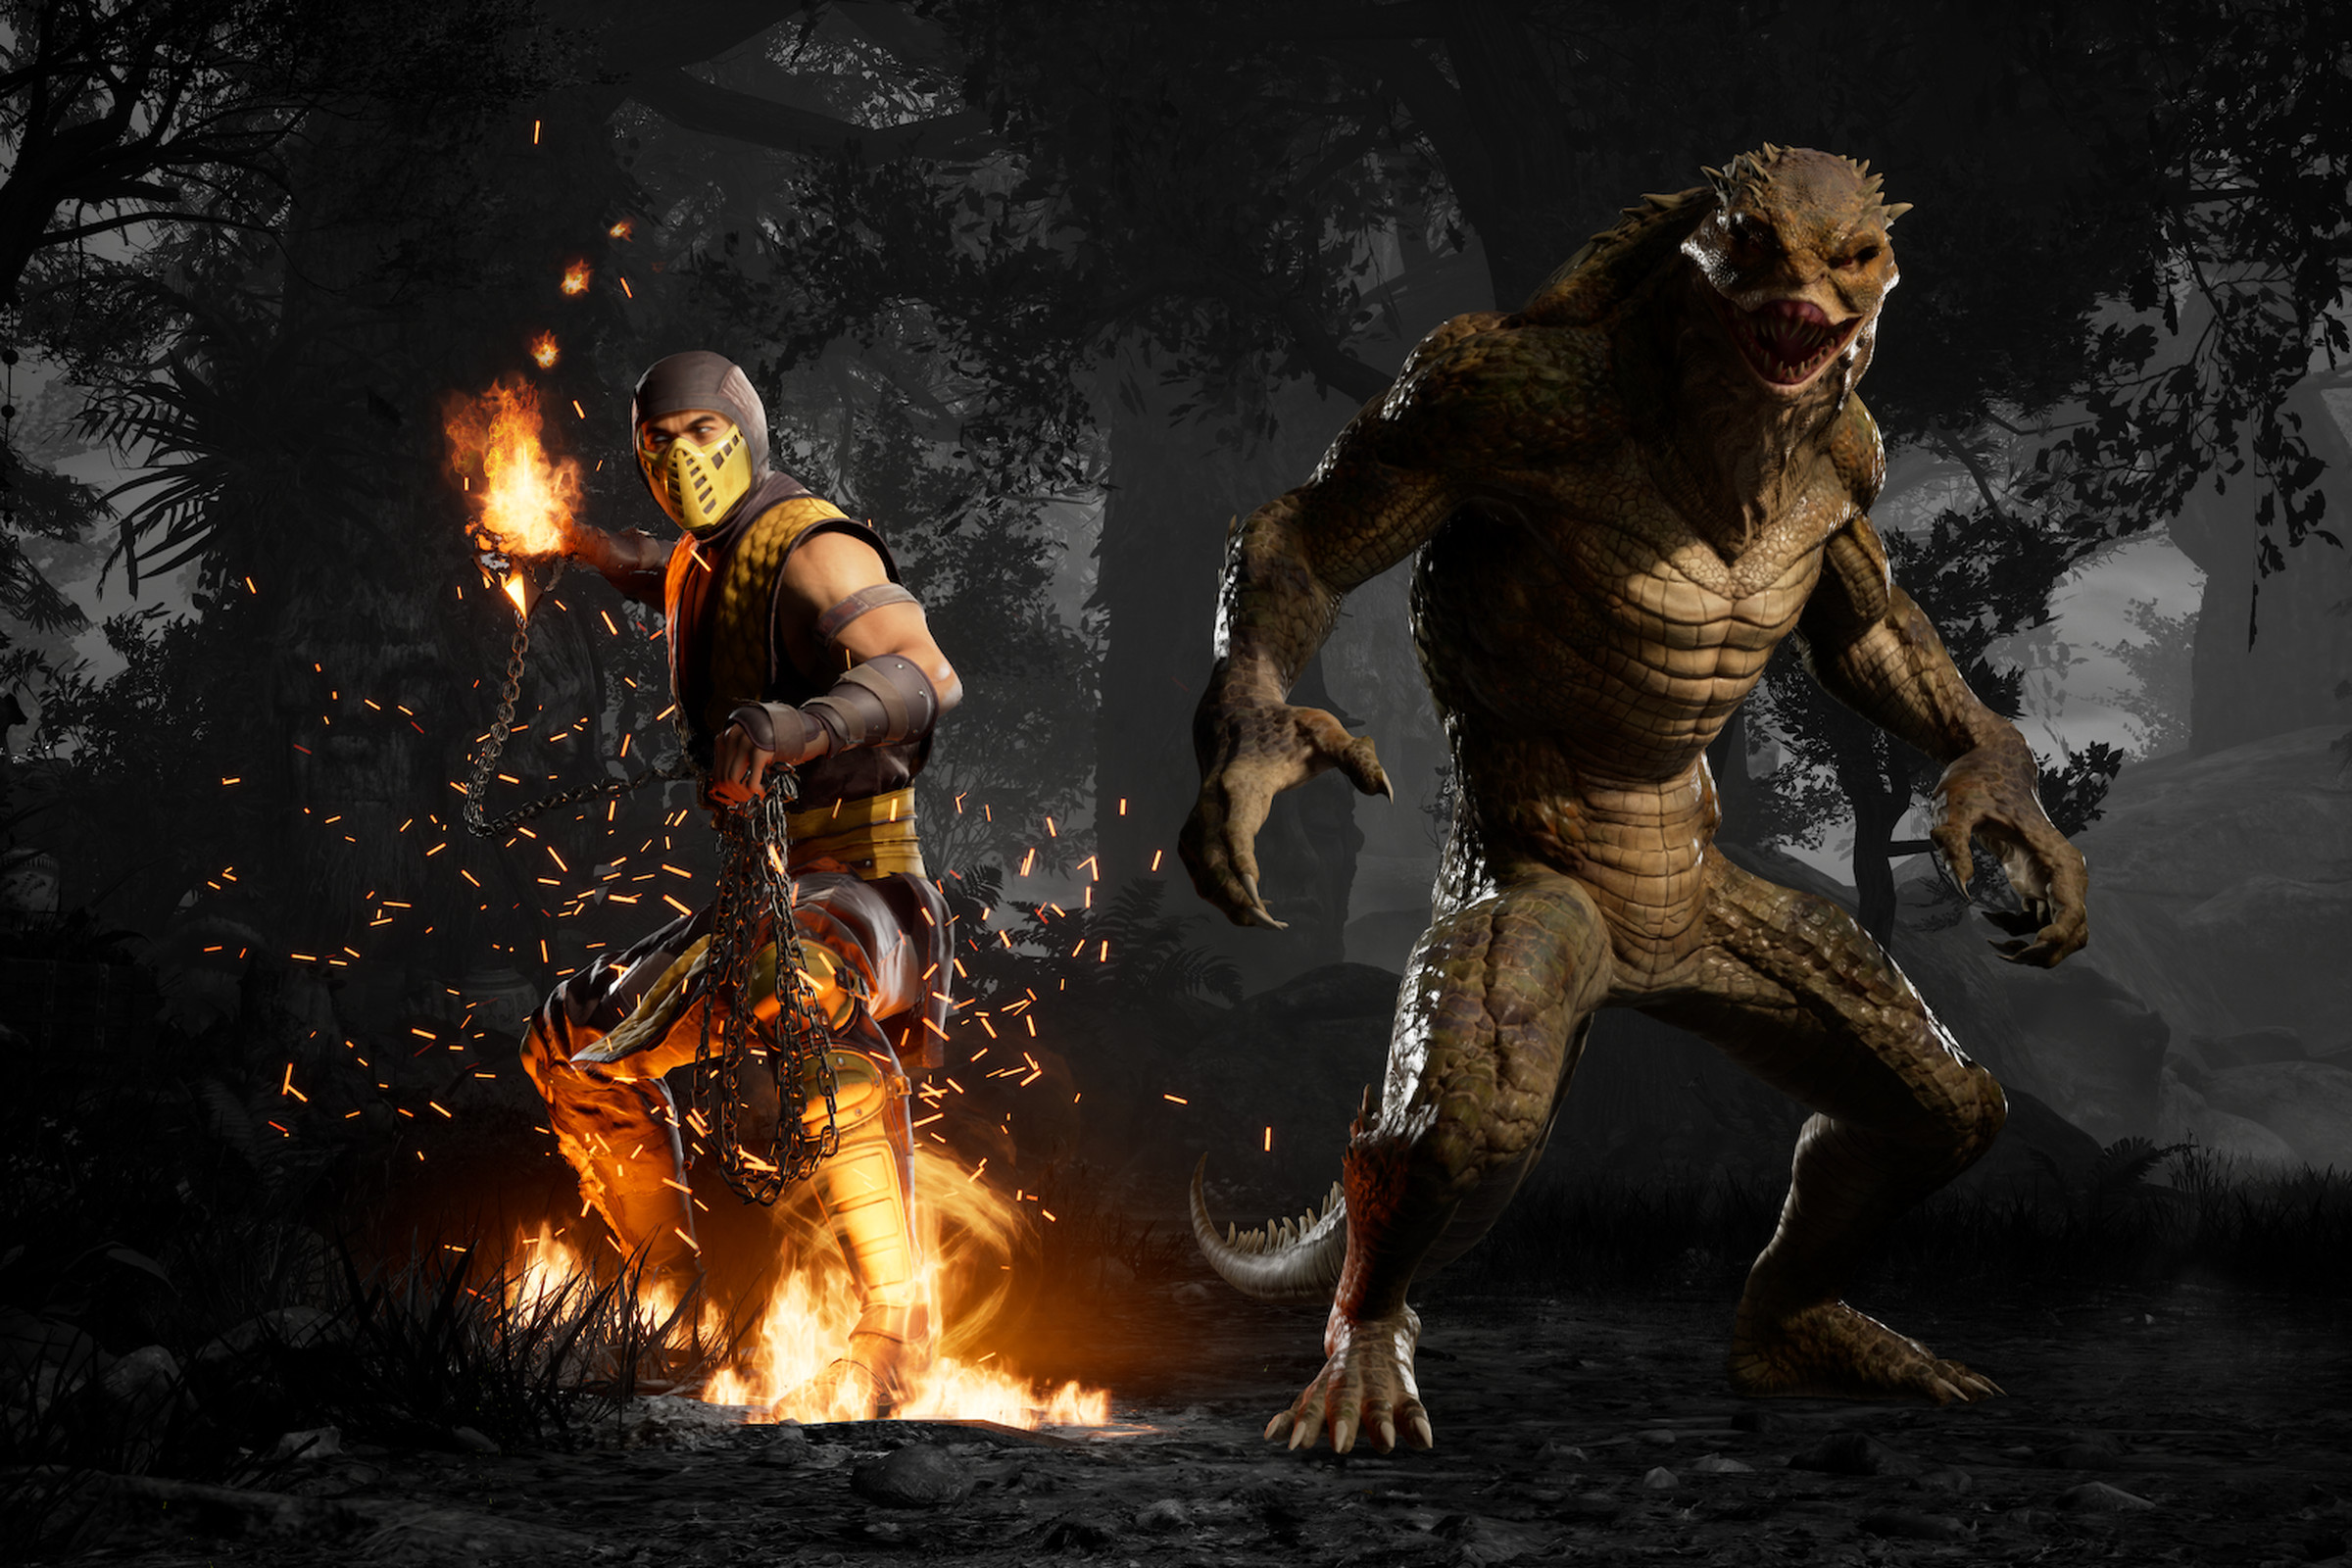 Screenshot from Mortal Kombat 1 featuring the character Scorpion and Reptile facing the camera